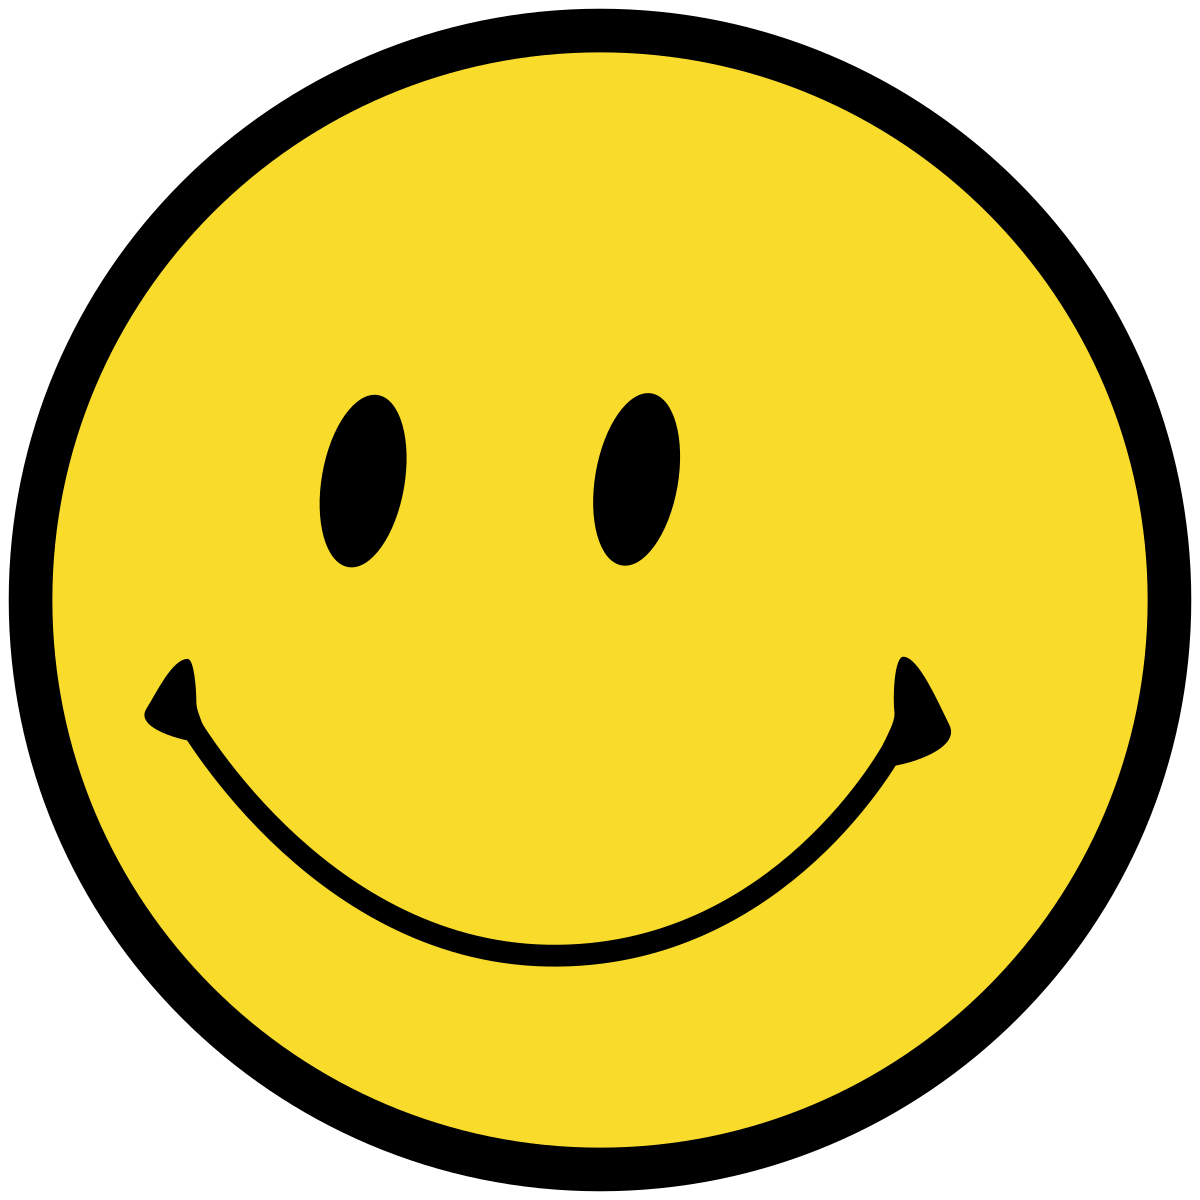 A smiling emoji or a picture of a person with a big smile.